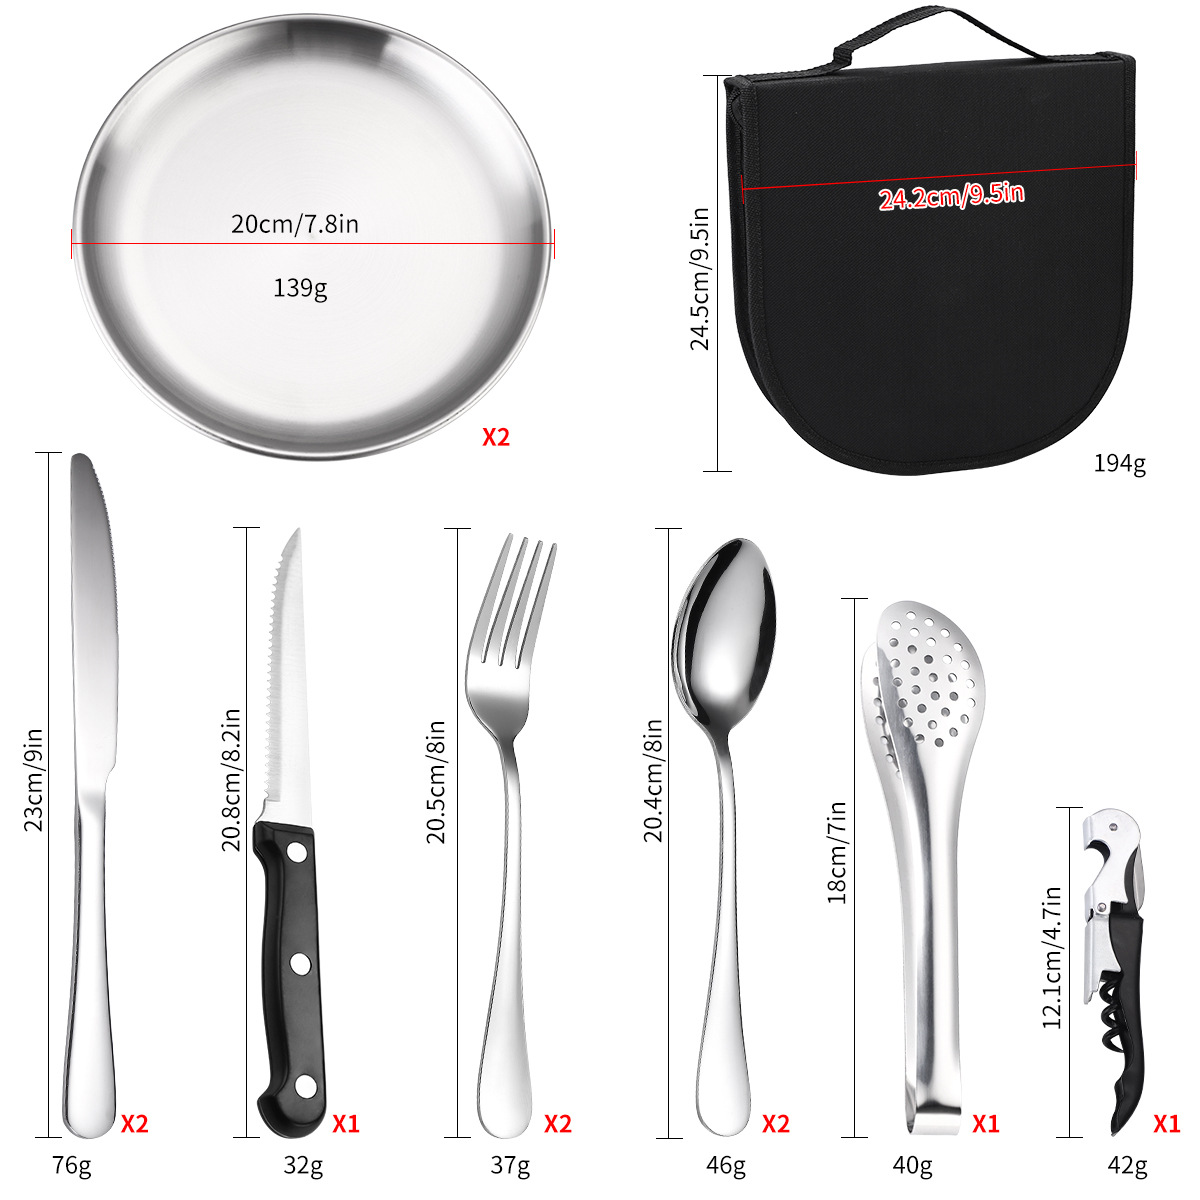 Cross-border stainless steel tableware 10 piece set portable outdoor camping tableware bag holder knife fork spoon plate 20 piece set